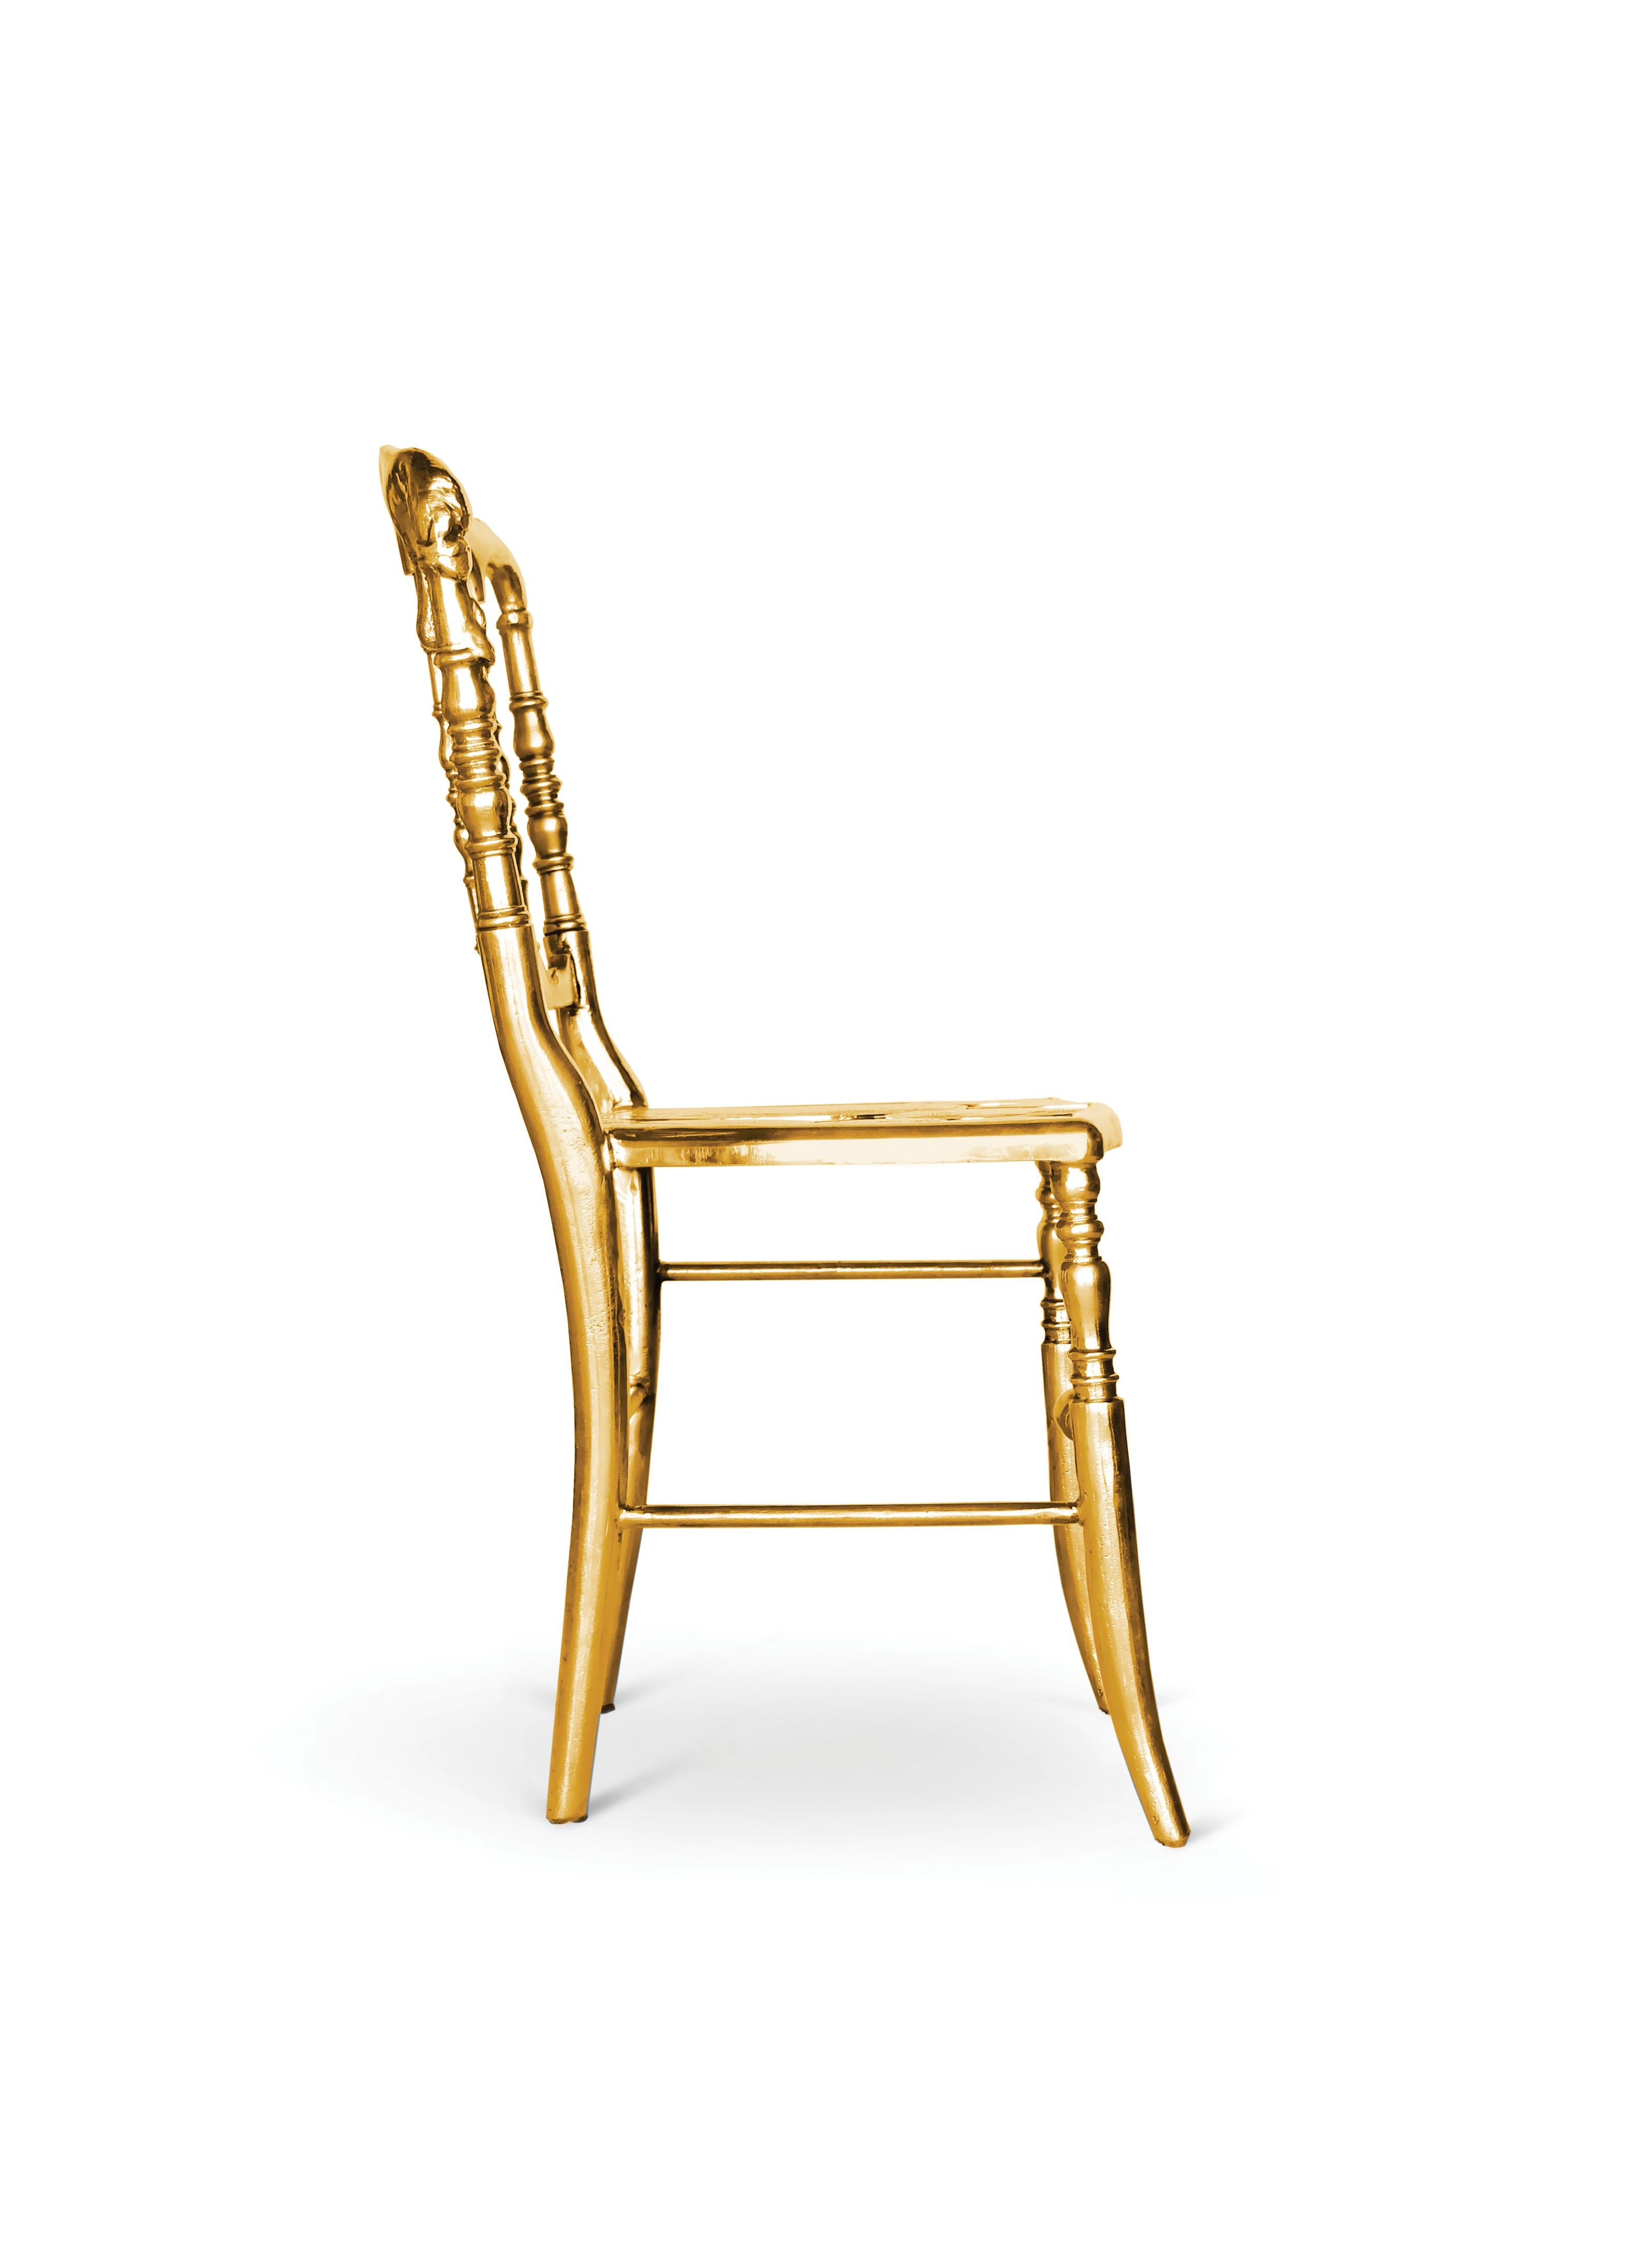 The Emporium chair is designed in a classic form, with distinctive design elements and a unique Boca do Lobo touch. Drawing inspiration from the surrealist movement, cast in a unique shape with intricate details, this exclusive chair radiates a